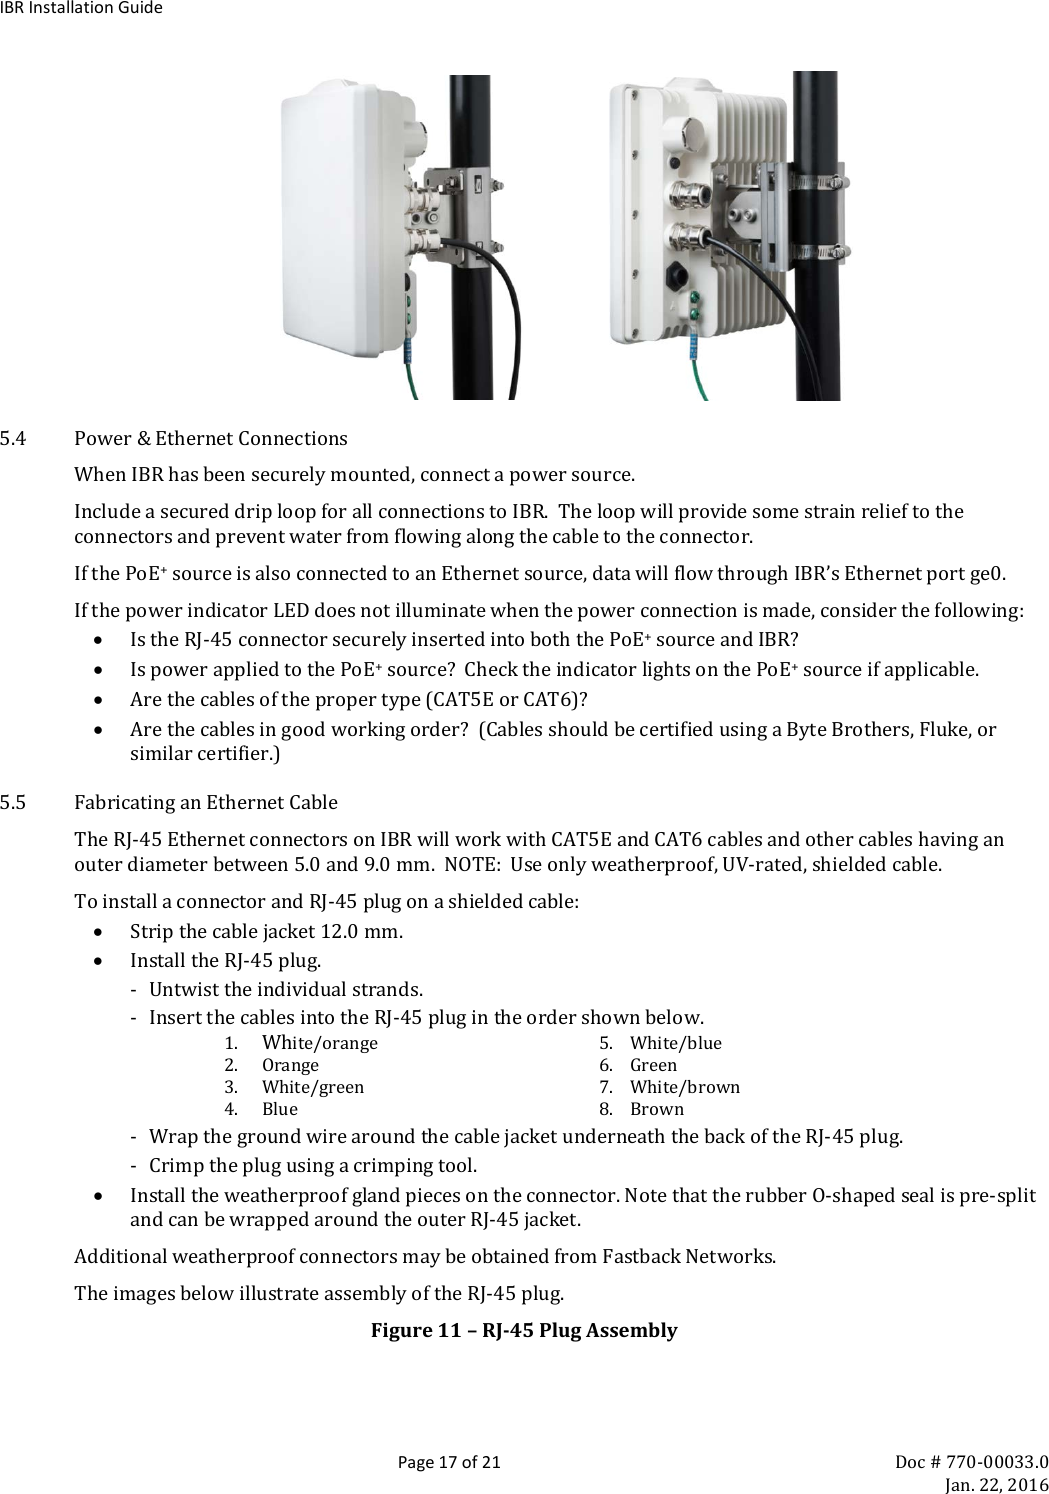 IBR Installation Guide  Page 17 of 21 Doc # 770-00033.0     Jan. 22, 2016                   5.4 Power &amp; Ethernet Connections When IBR has been securely mounted, connect a power source.   Include a secured drip loop for all connections to IBR.  The loop will provide some strain relief to the connectors and prevent water from flowing along the cable to the connector. If the PoE+ source is also connected to an Ethernet source, data will flow through IBR’s Ethernet port ge0. If the power indicator LED does not illuminate when the power connection is made, consider the following: • Is the RJ-45 connector securely inserted into both the PoE+ source and IBR? • Is power applied to the PoE+ source?  Check the indicator lights on the PoE+ source if applicable. • Are the cables of the proper type (CAT5E or CAT6)? • Are the cables in good working order?  (Cables should be certified using a Byte Brothers, Fluke, or similar certifier.) 5.5 Fabricating an Ethernet Cable The RJ-45 Ethernet connectors on IBR will work with CAT5E and CAT6 cables and other cables having an outer diameter between 5.0 and 9.0 mm.  NOTE:  Use only weatherproof, UV-rated, shielded cable. To install a connector and RJ-45 plug on a shielded cable: • Strip the cable jacket 12.0 mm. • Install the RJ-45 plug. - Untwist the individual strands. - Insert the cables into the RJ-45 plug in the order shown below. 1. White/orange 5.    White/blue 2. Orange 6.    Green 3. White/green 7.    White/brown 4. Blue 8.    Brown - Wrap the ground wire around the cable jacket underneath the back of the RJ-45 plug. - Crimp the plug using a crimping tool. • Install the weatherproof gland pieces on the connector. Note that the rubber O-shaped seal is pre-split and can be wrapped around the outer RJ-45 jacket. Additional weatherproof connectors may be obtained from Fastback Networks.  The images below illustrate assembly of the RJ-45 plug. Figure 11 – RJ-45 Plug Assembly 